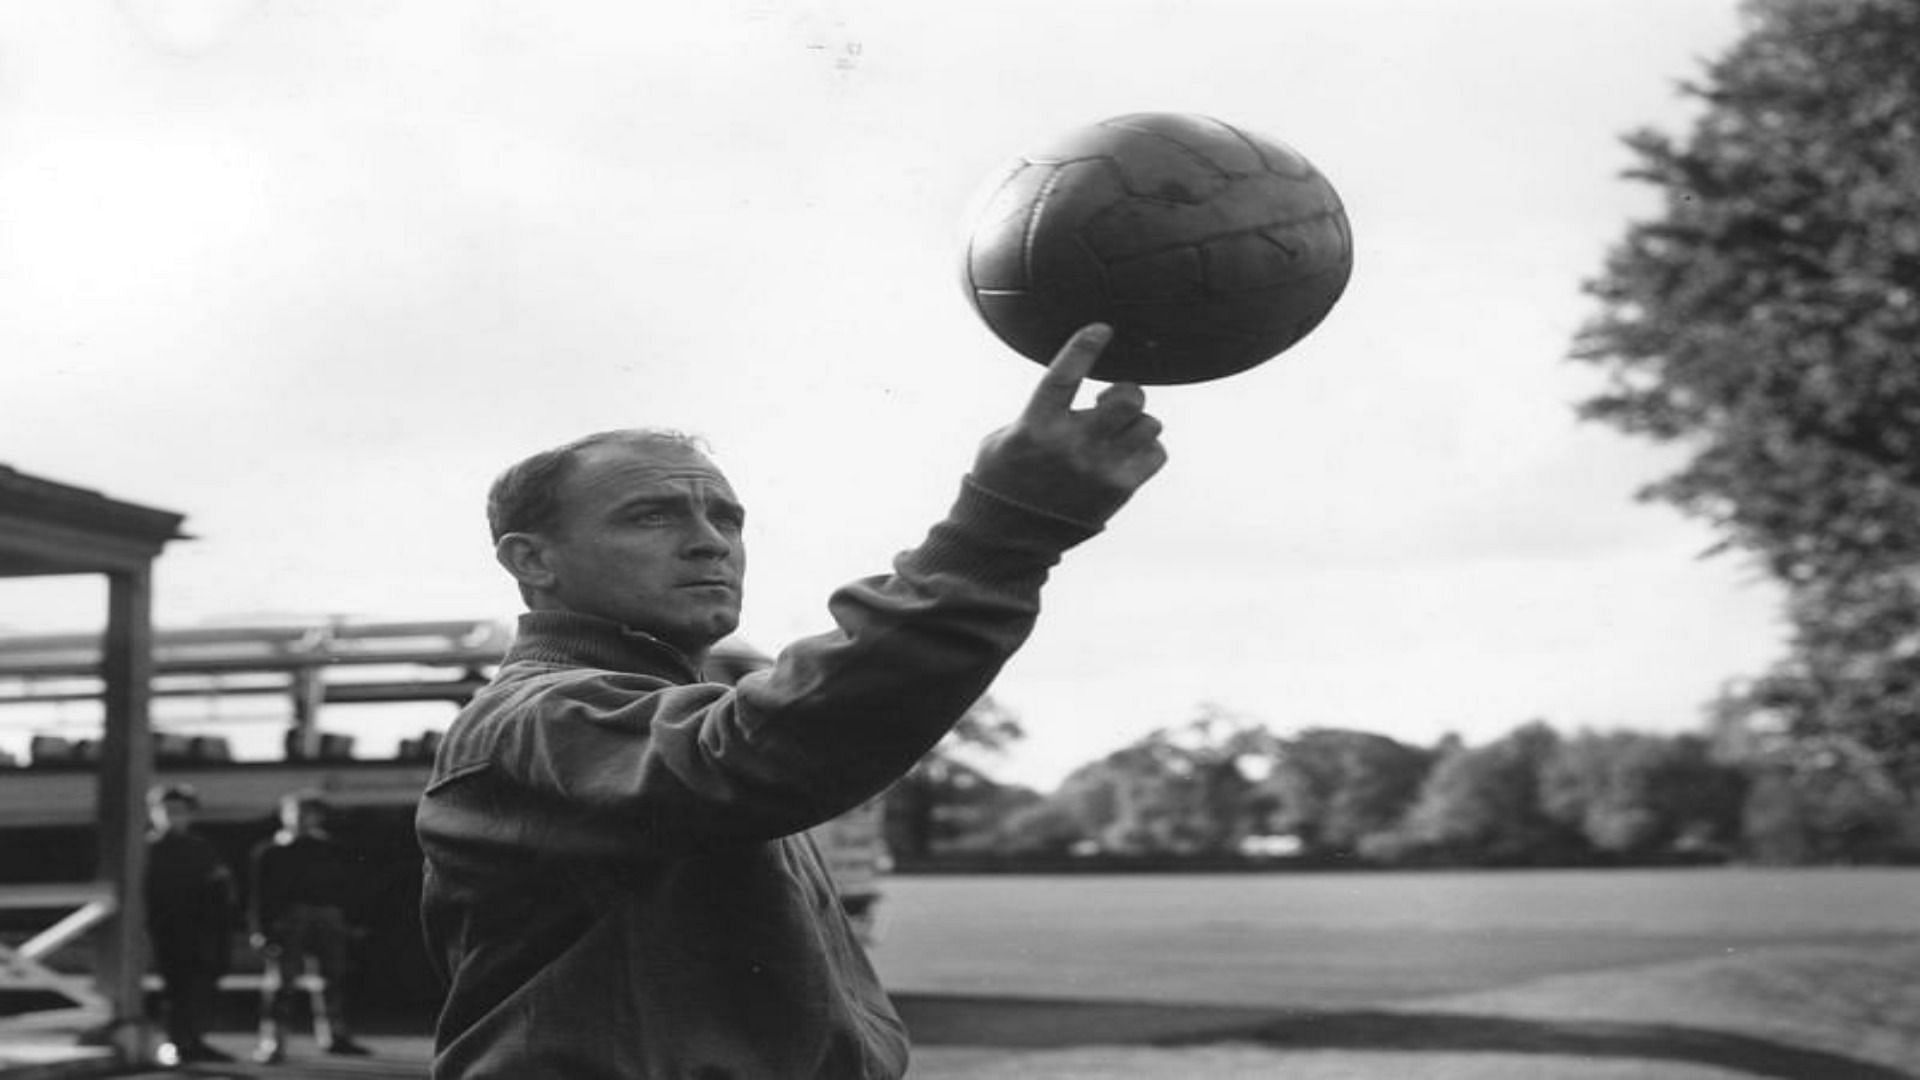 di Stefano was notably banned from international football for featuring illegally for Colombia.